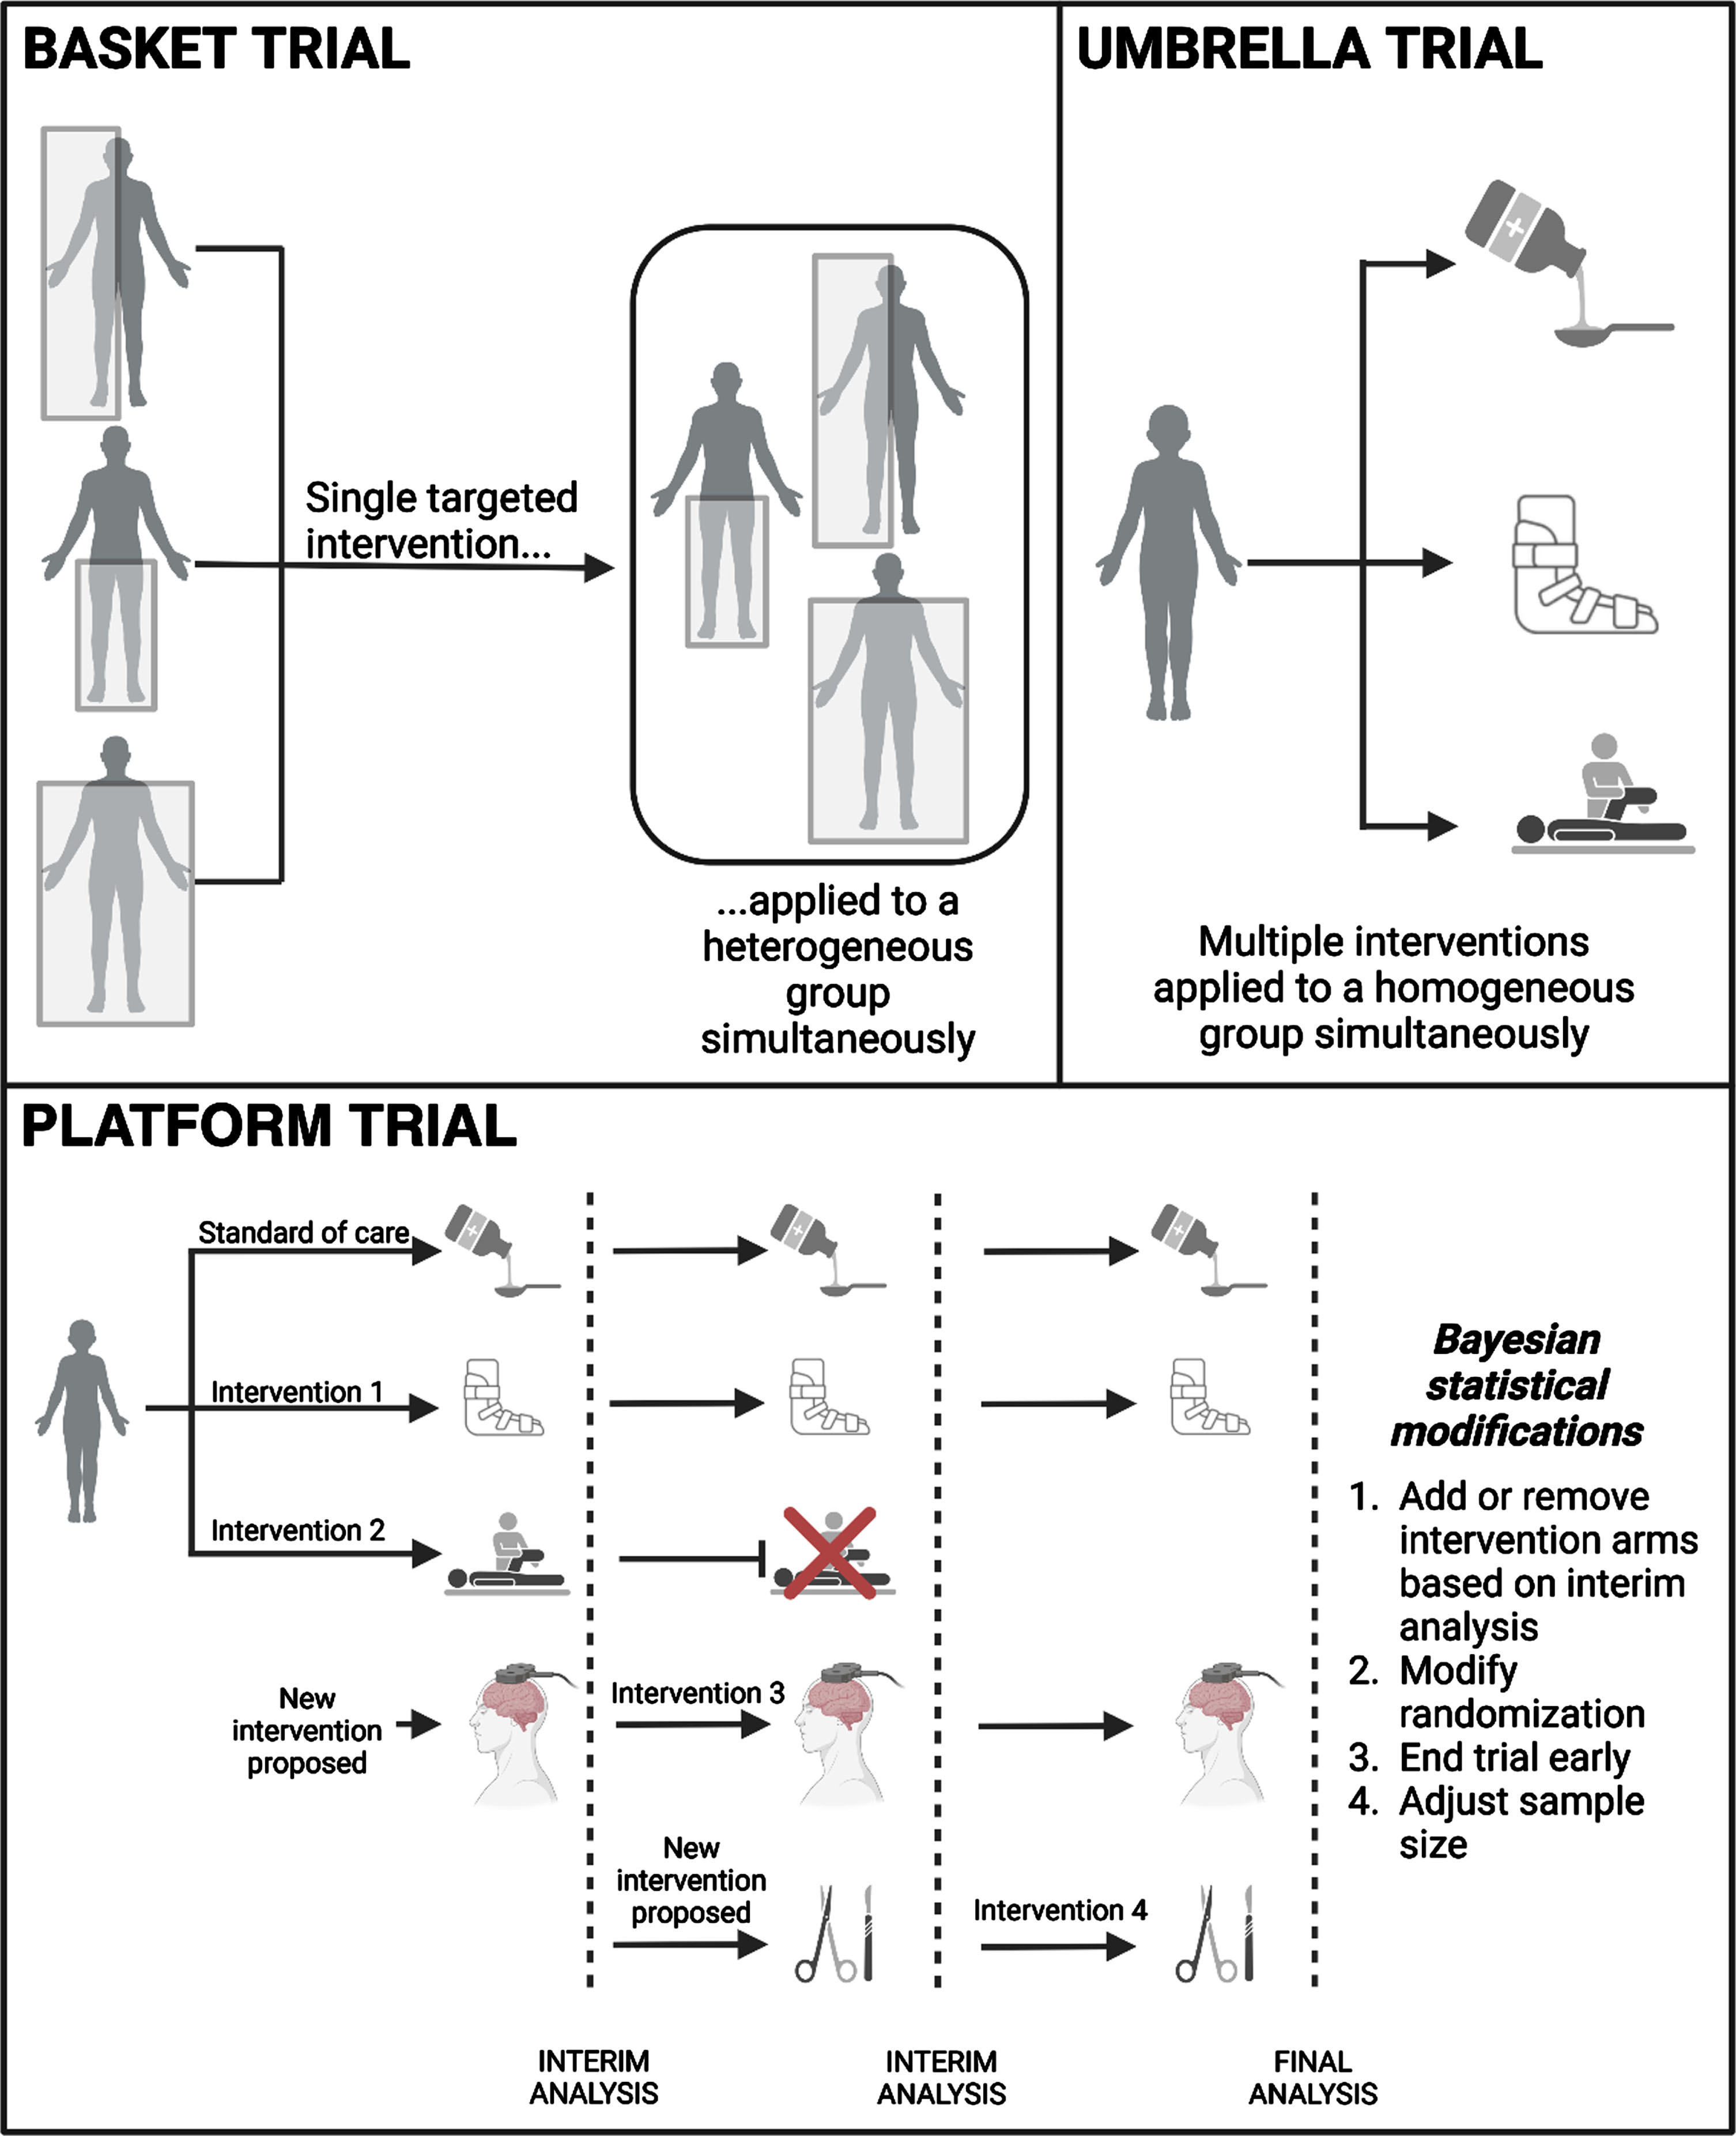 Types of adaptive designs. Here we review three adaptive designs and show how they can be applied directly to CP. Basket trials classically test one intervention in multiple diseases. In CP, we can instead test different phenotypes (shown here), etiologies, or types of muscle tone. Umbrella trials allow multiple intervention arms to be tested simultaneously, shown here as a medication, bracing, and therapy. Finally, platform trials allow for the greatest flexibility, with one control group receiving the standard of care (e.g., enteral medicine) and others receiving test interventions simultaneously (e.g., bracing, therapy, transcranial magnetic stimulation, and surgery). The addition of Bayesian statistical models further customizes the trial, reducing costs and total time to investigate all study interventions. (Created with BioRender.com).